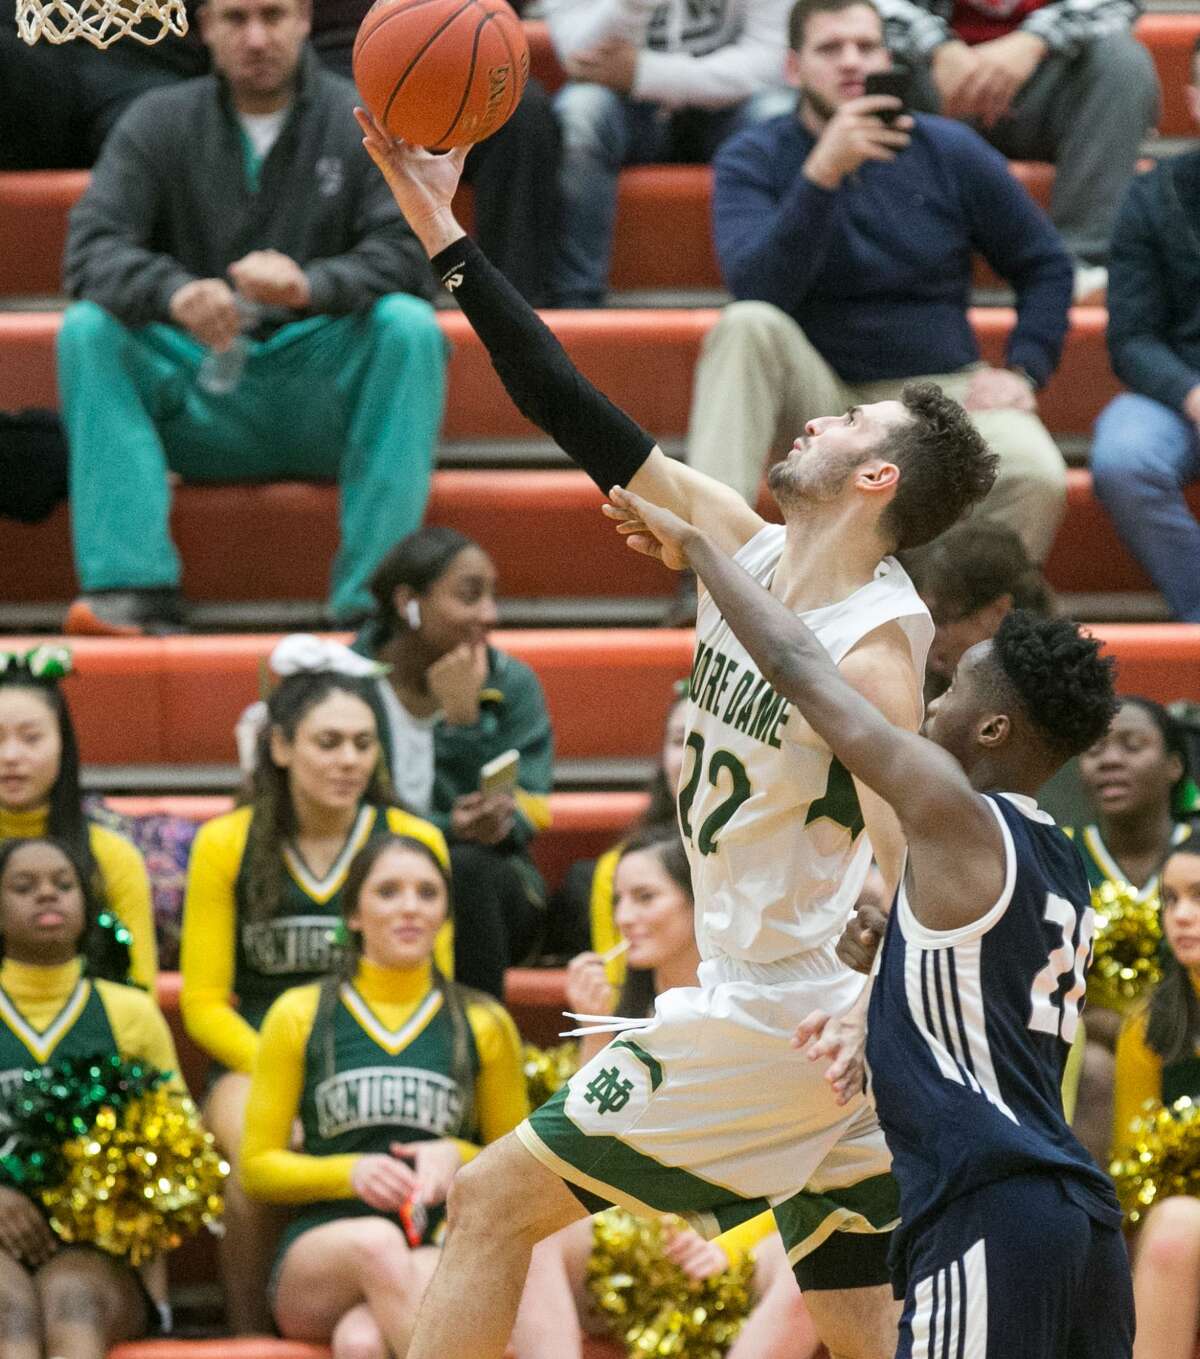 (John Vanacore/For Hearst Connecicut Media) The Notre Dame Green Knights and Hillhouse Academics traveled to Shelton High School for the 2nd Round of the CIAC Division 1 basketball tournament Wednesday night. Notre Dame advances to the Quarterfinals with their 57-36 win.